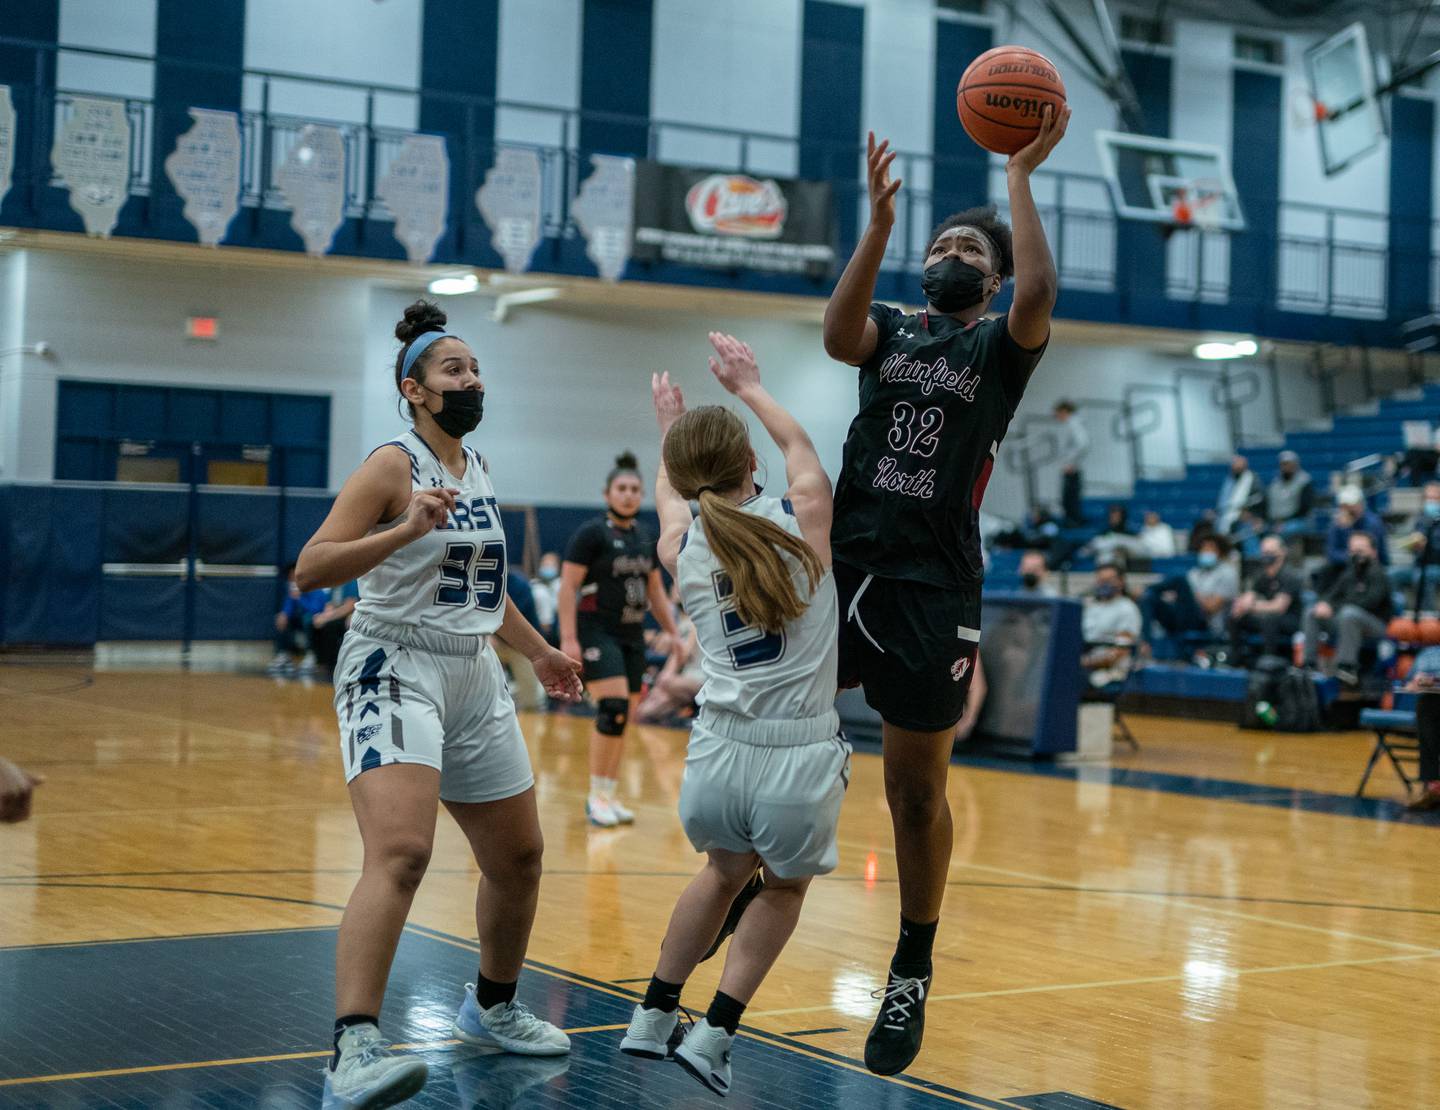 Plainfield North's Jalyn Patterson (32) shoots the ball in the post over Oswego East's Maggie Lewandowski (3) during a basketball game at Oswego East High School on Tuesday, Jan 18, 2022.